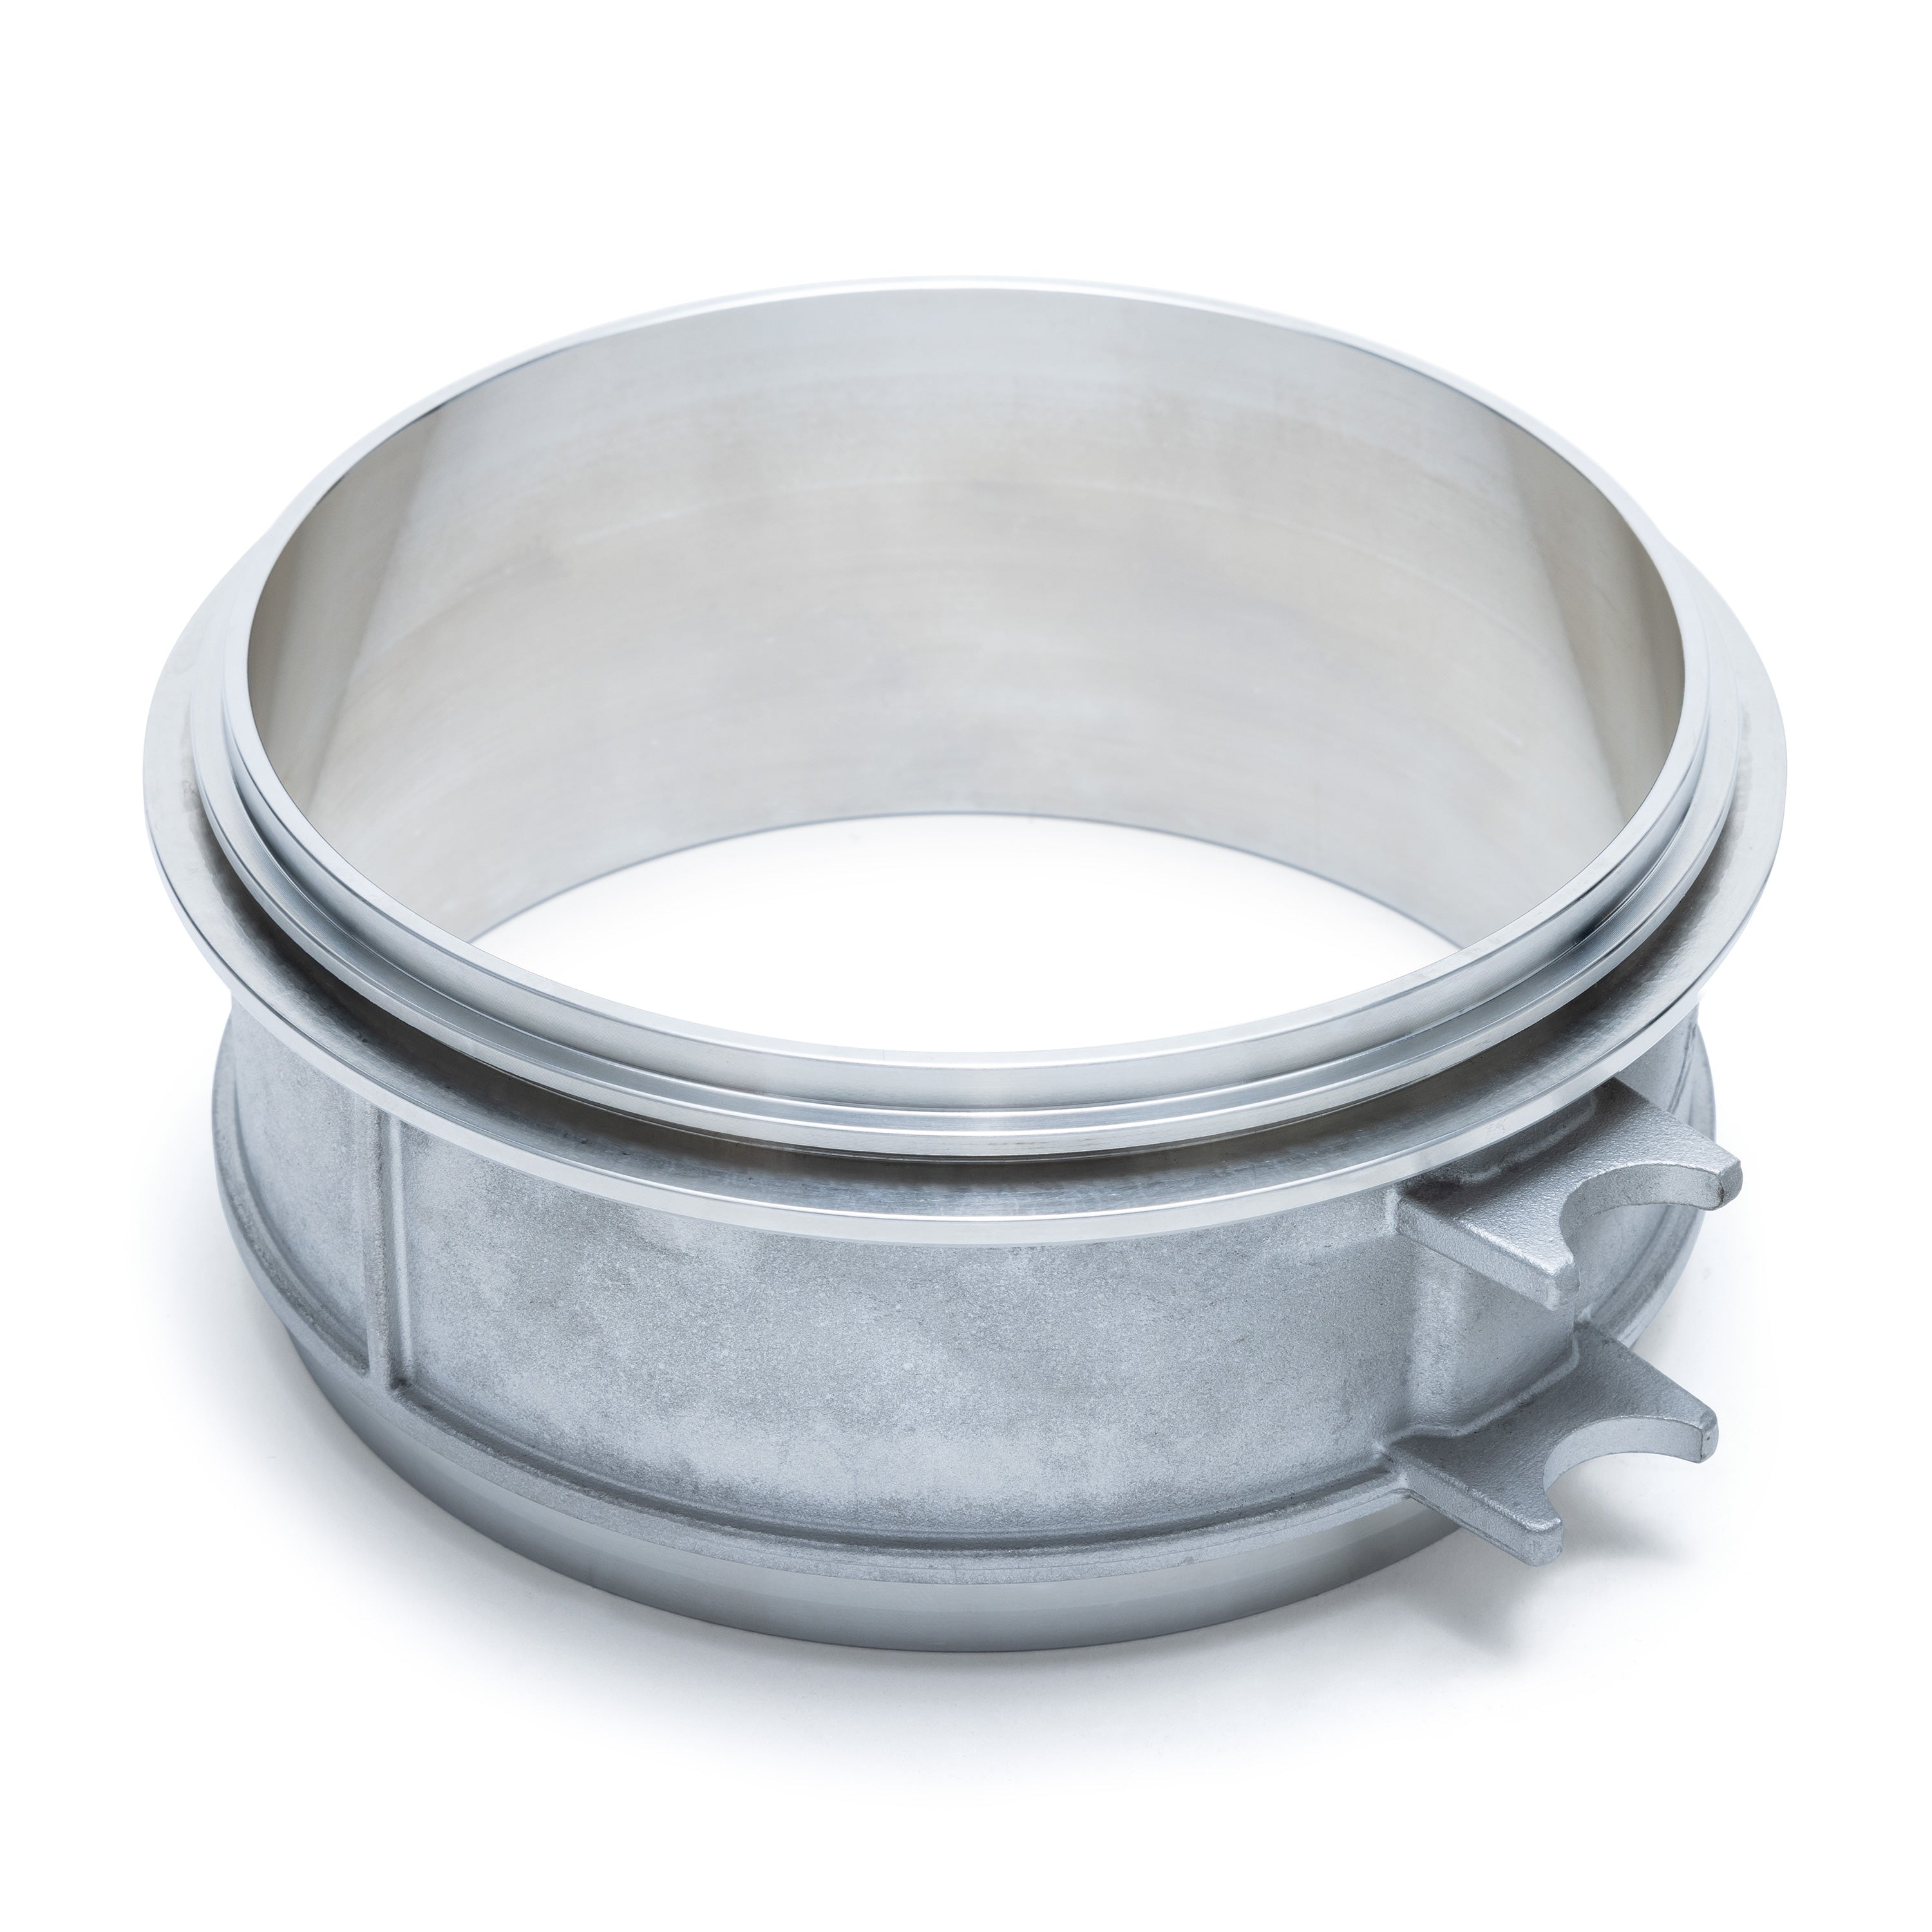 Solas Stainless Steel Wear Ring for Sea-Doo Spark Models